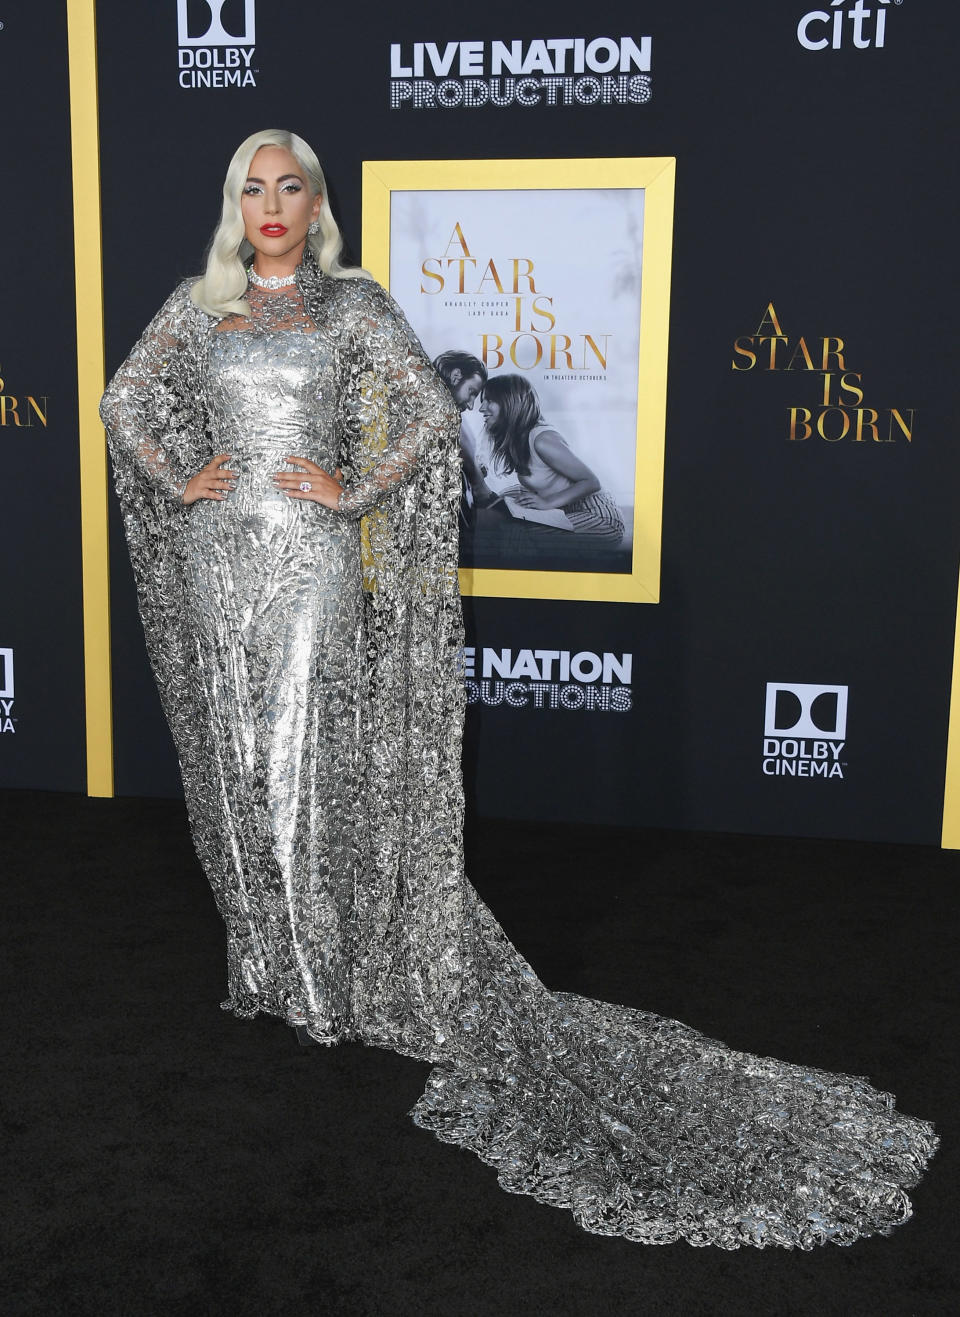 Gaga wears a shimmering Givenchy couture gown for the Los Angeles premiere of "A Star Is Born" on Sept. 25, 2018.